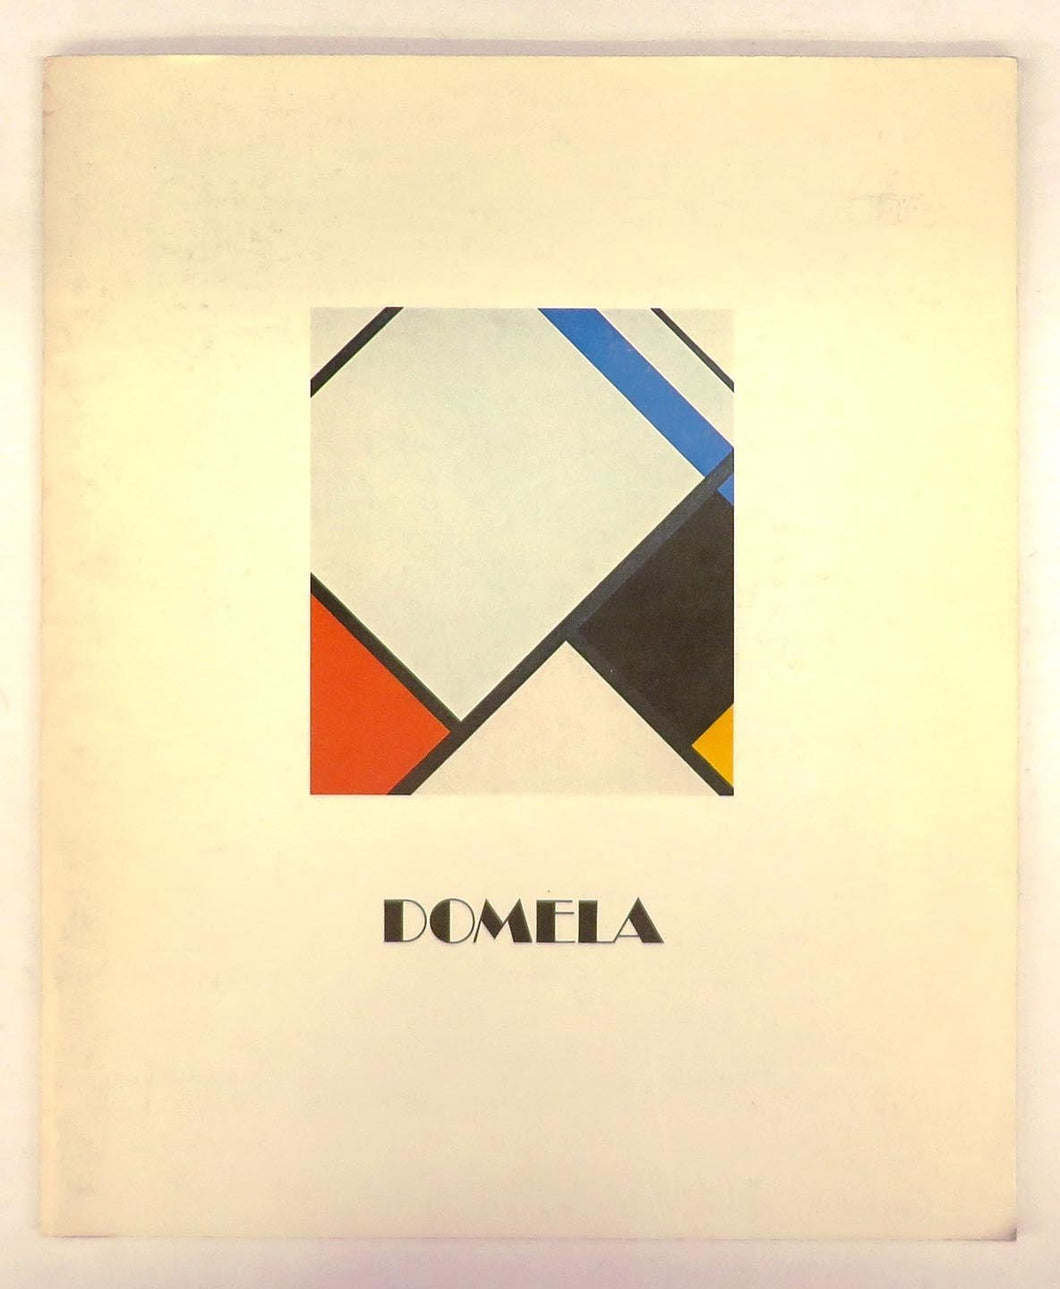 Domela: Touring retrospective in the USA 1927/1977 in cooperation  with Galerie Roger d'Amécourt Paris